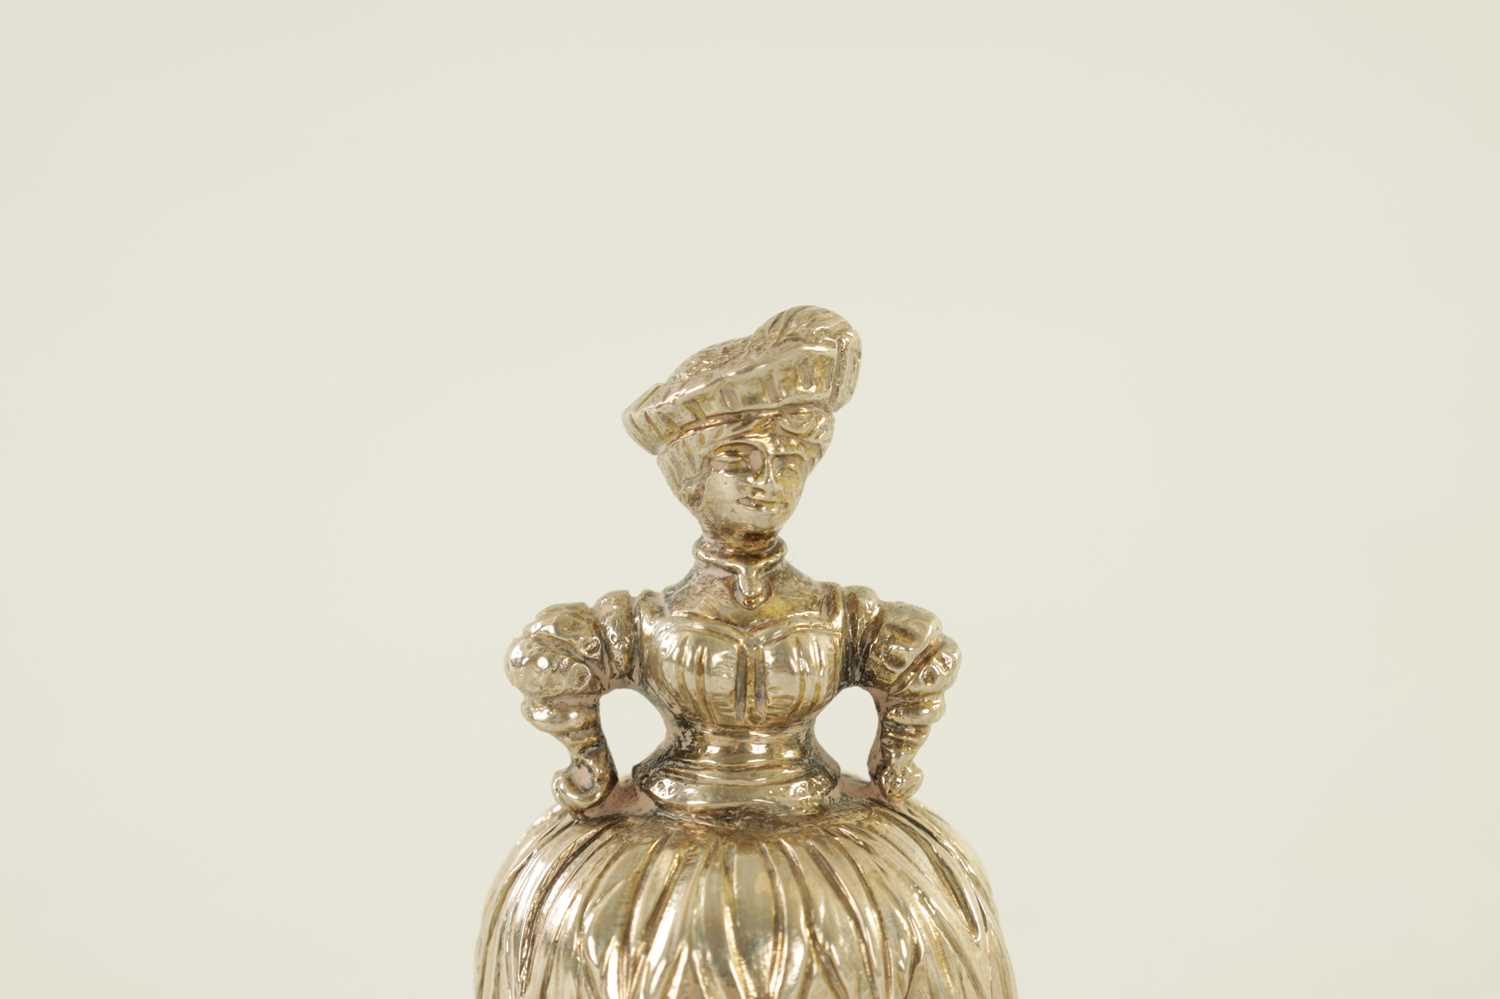 A LATE 19TH CENTURY DUTCH EMBOSSED MINIATURE BELL - Image 2 of 6